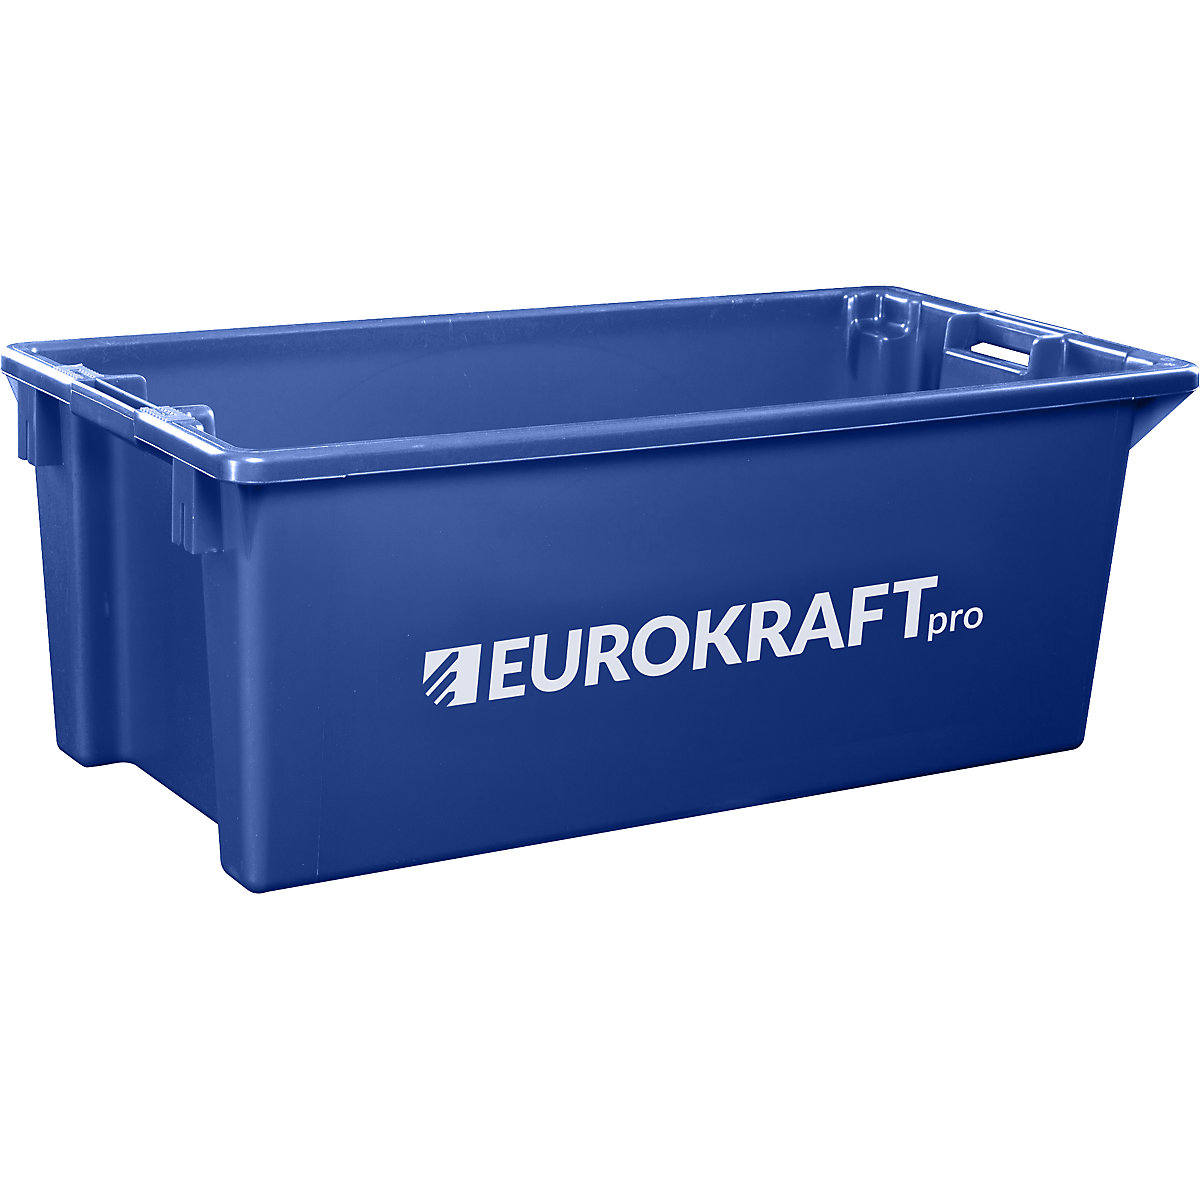 EUROKRAFTpro – Stack/nest container made of polypropylene suitable for foodstuffs, 13 l capacity, pack of 4, solid walls and base, blue